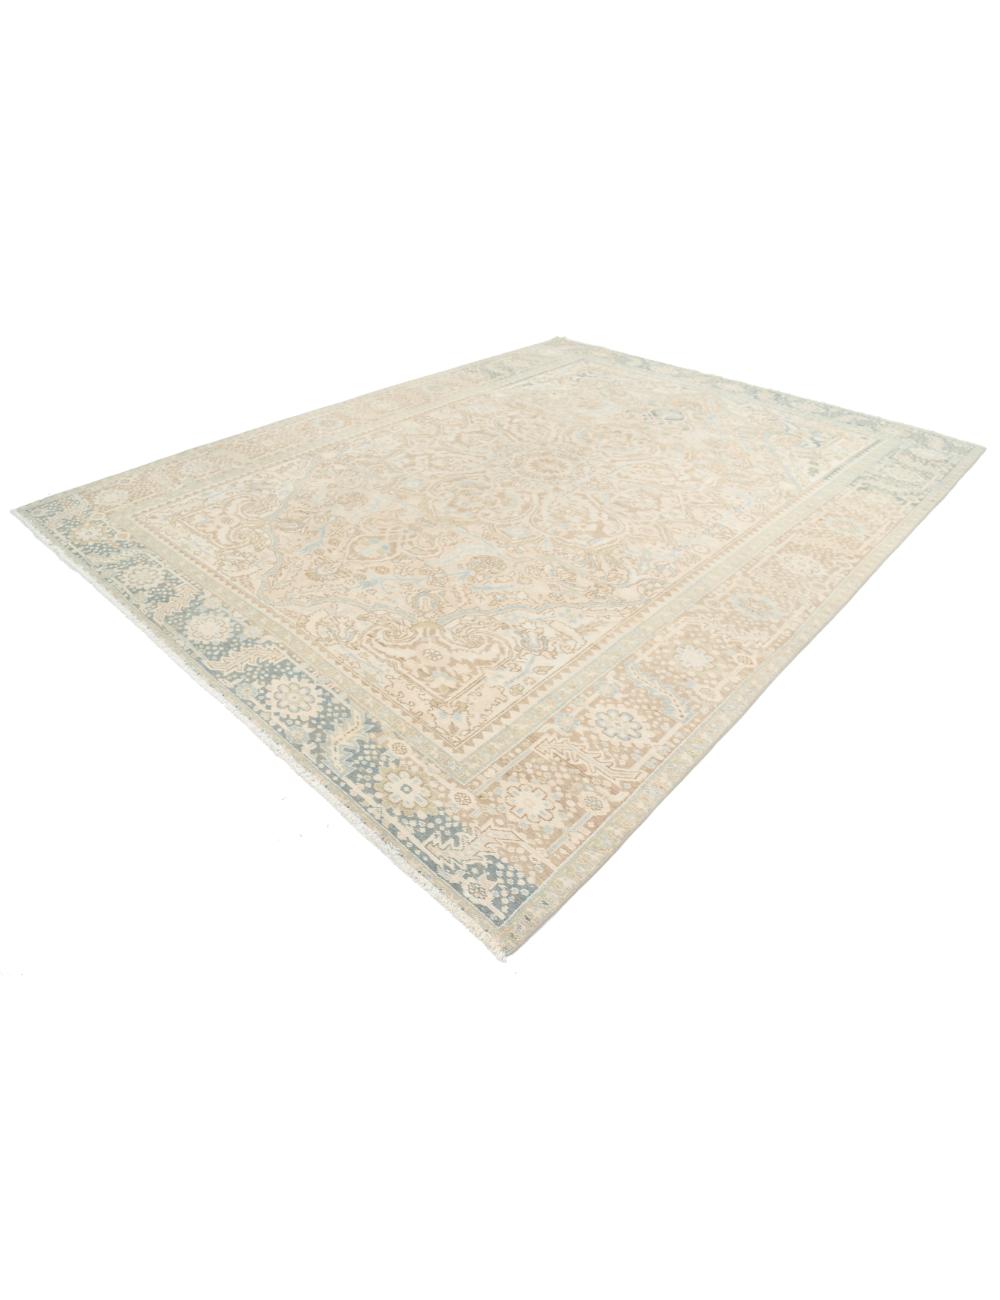 Heriz 9' 10" X 12' 5" Hand-Knotted Wool Rug 9' 10" X 12' 5" (300 X 378) / Taupe / Grey